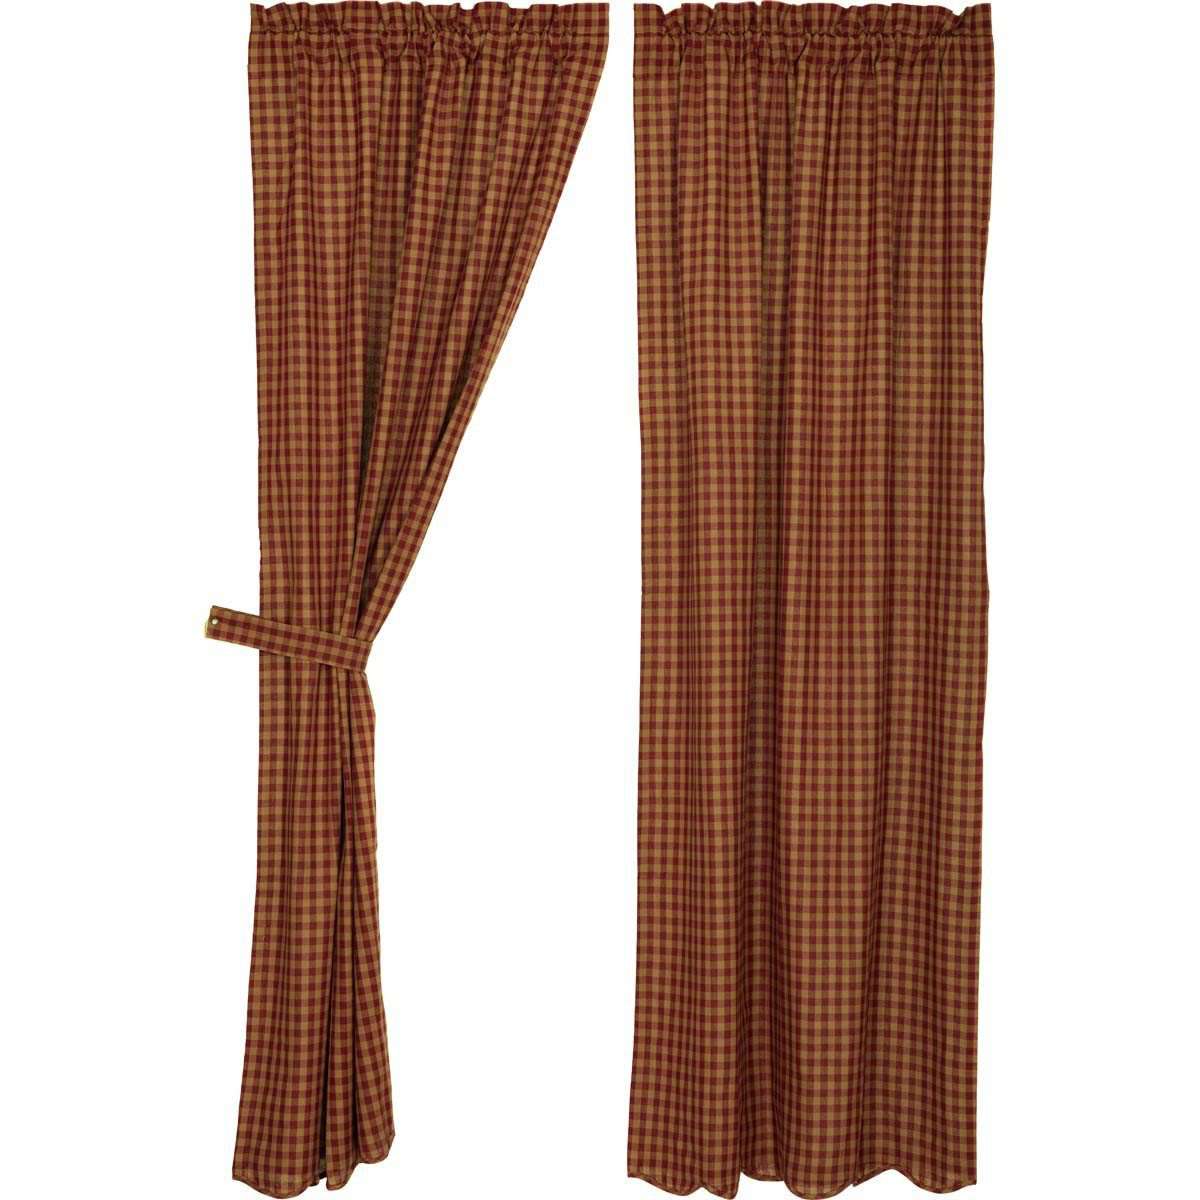 Burgundy Check Scalloped Panel Country Curtain Set of 2 84"x40" - The Fox Decor